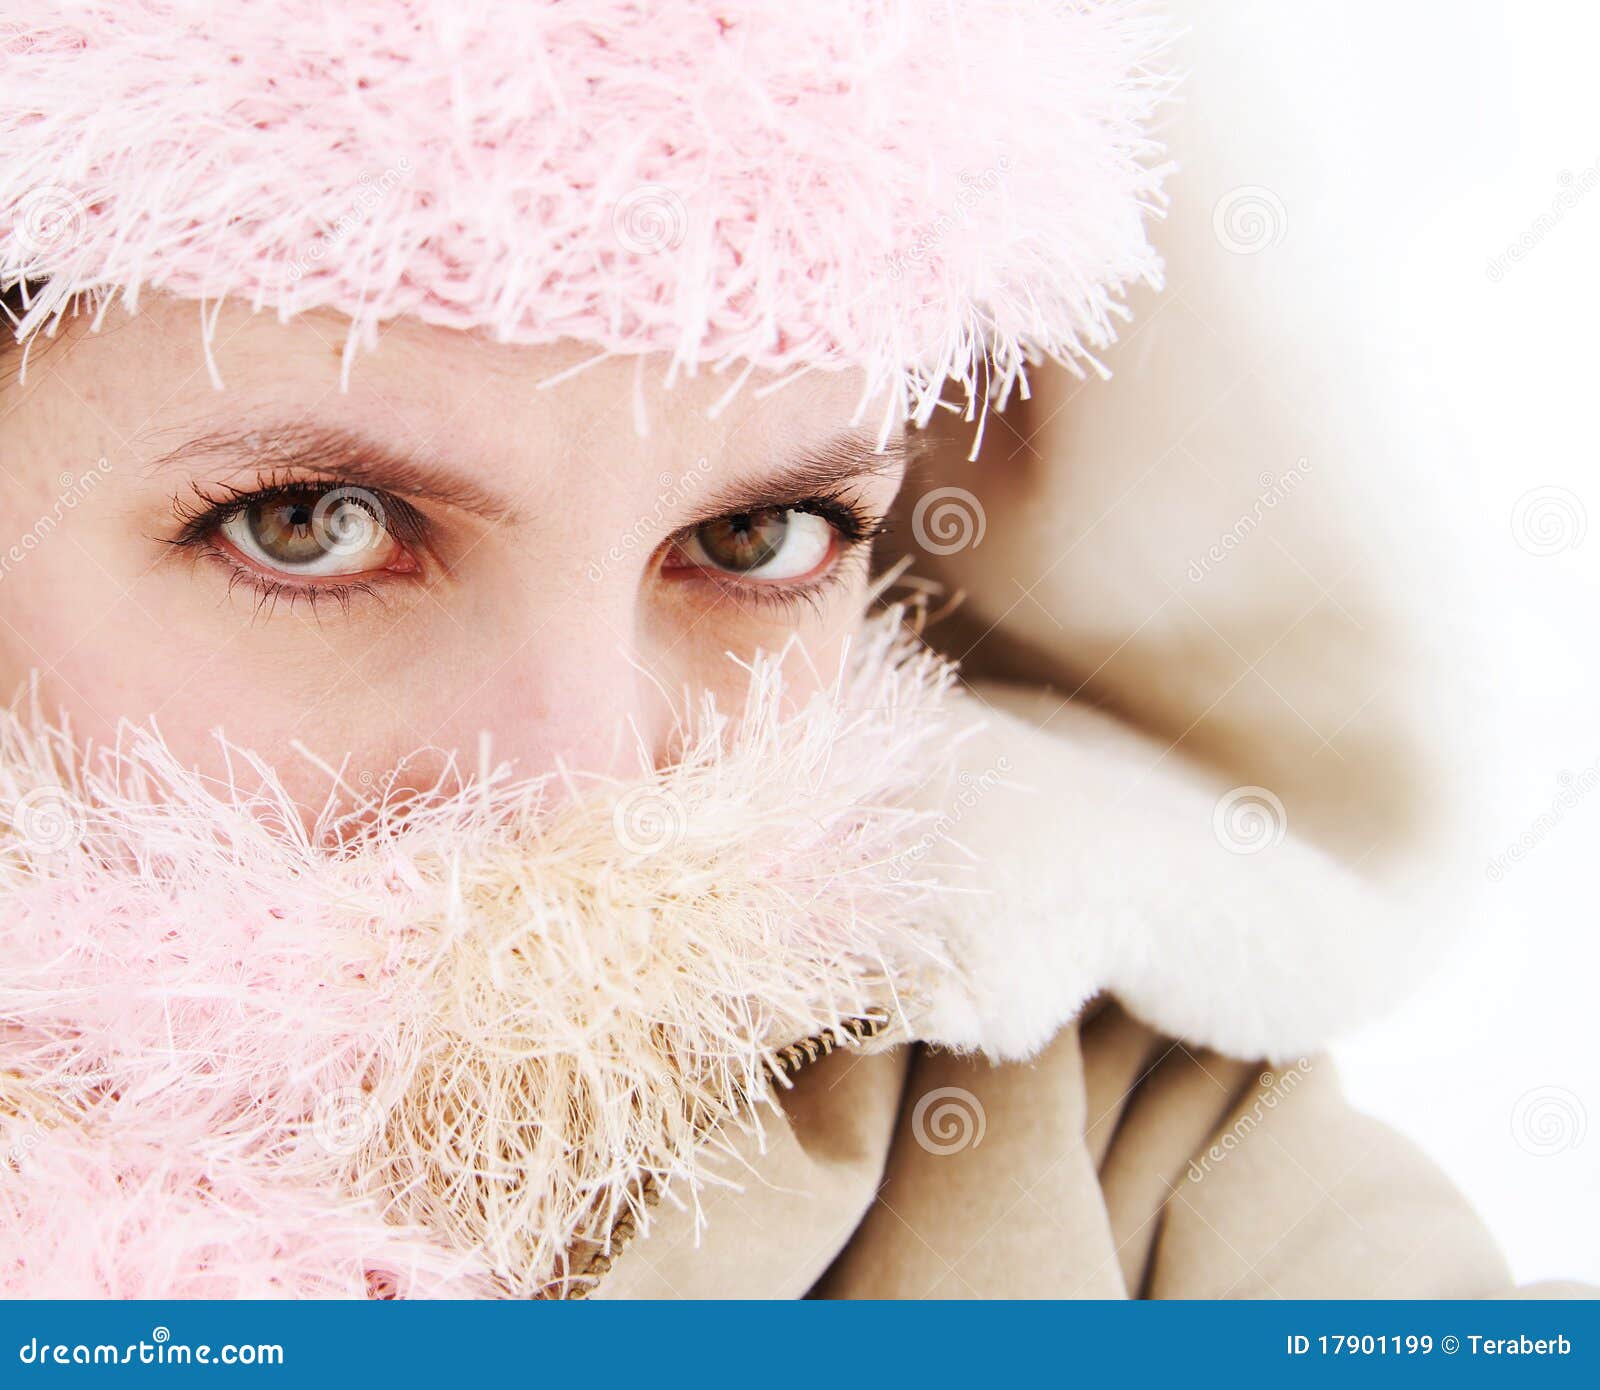 Cold Young Woman Bundled Up Royalty Free Stock Images - Image: 17901199